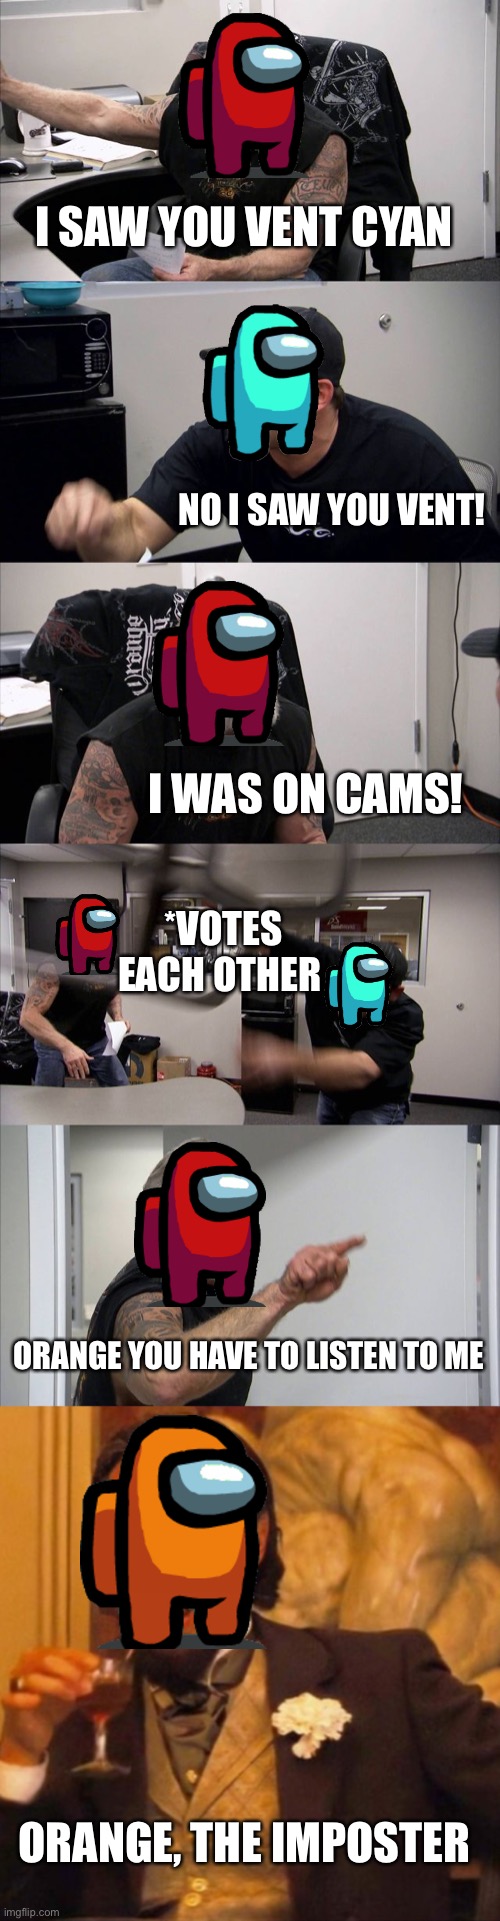 Cyan was not the imposter | I SAW YOU VENT CYAN; NO I SAW YOU VENT! I WAS ON CAMS! *VOTES EACH OTHER; ORANGE YOU HAVE TO LISTEN TO ME; ORANGE, THE IMPOSTER | image tagged in memes,american chopper argument | made w/ Imgflip meme maker